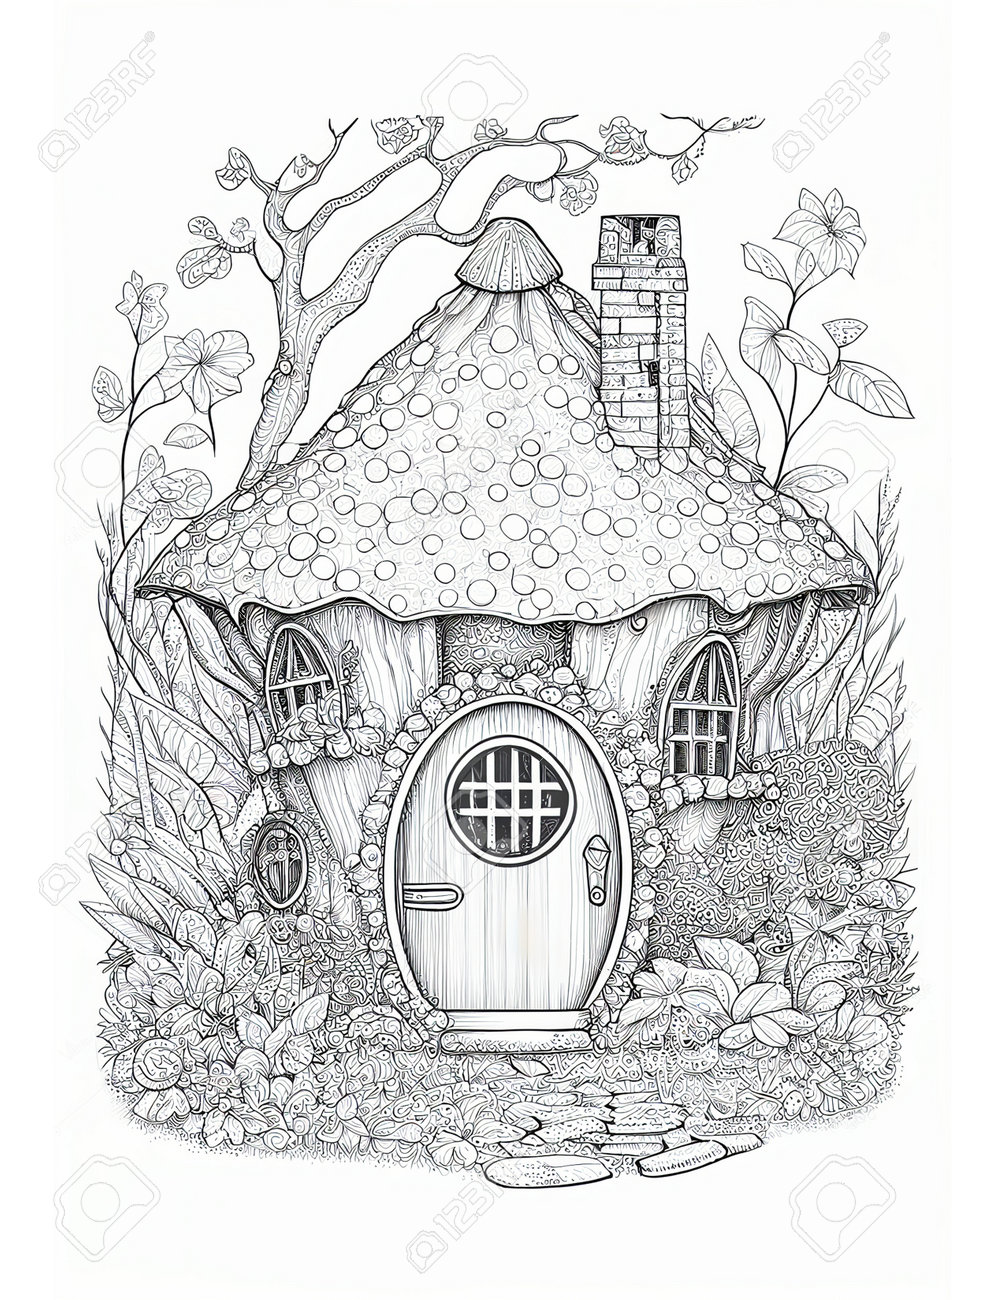 Cute fairy cottage coloring book kids adult coloring pages ai generartive stock photo picture and royalty free image image